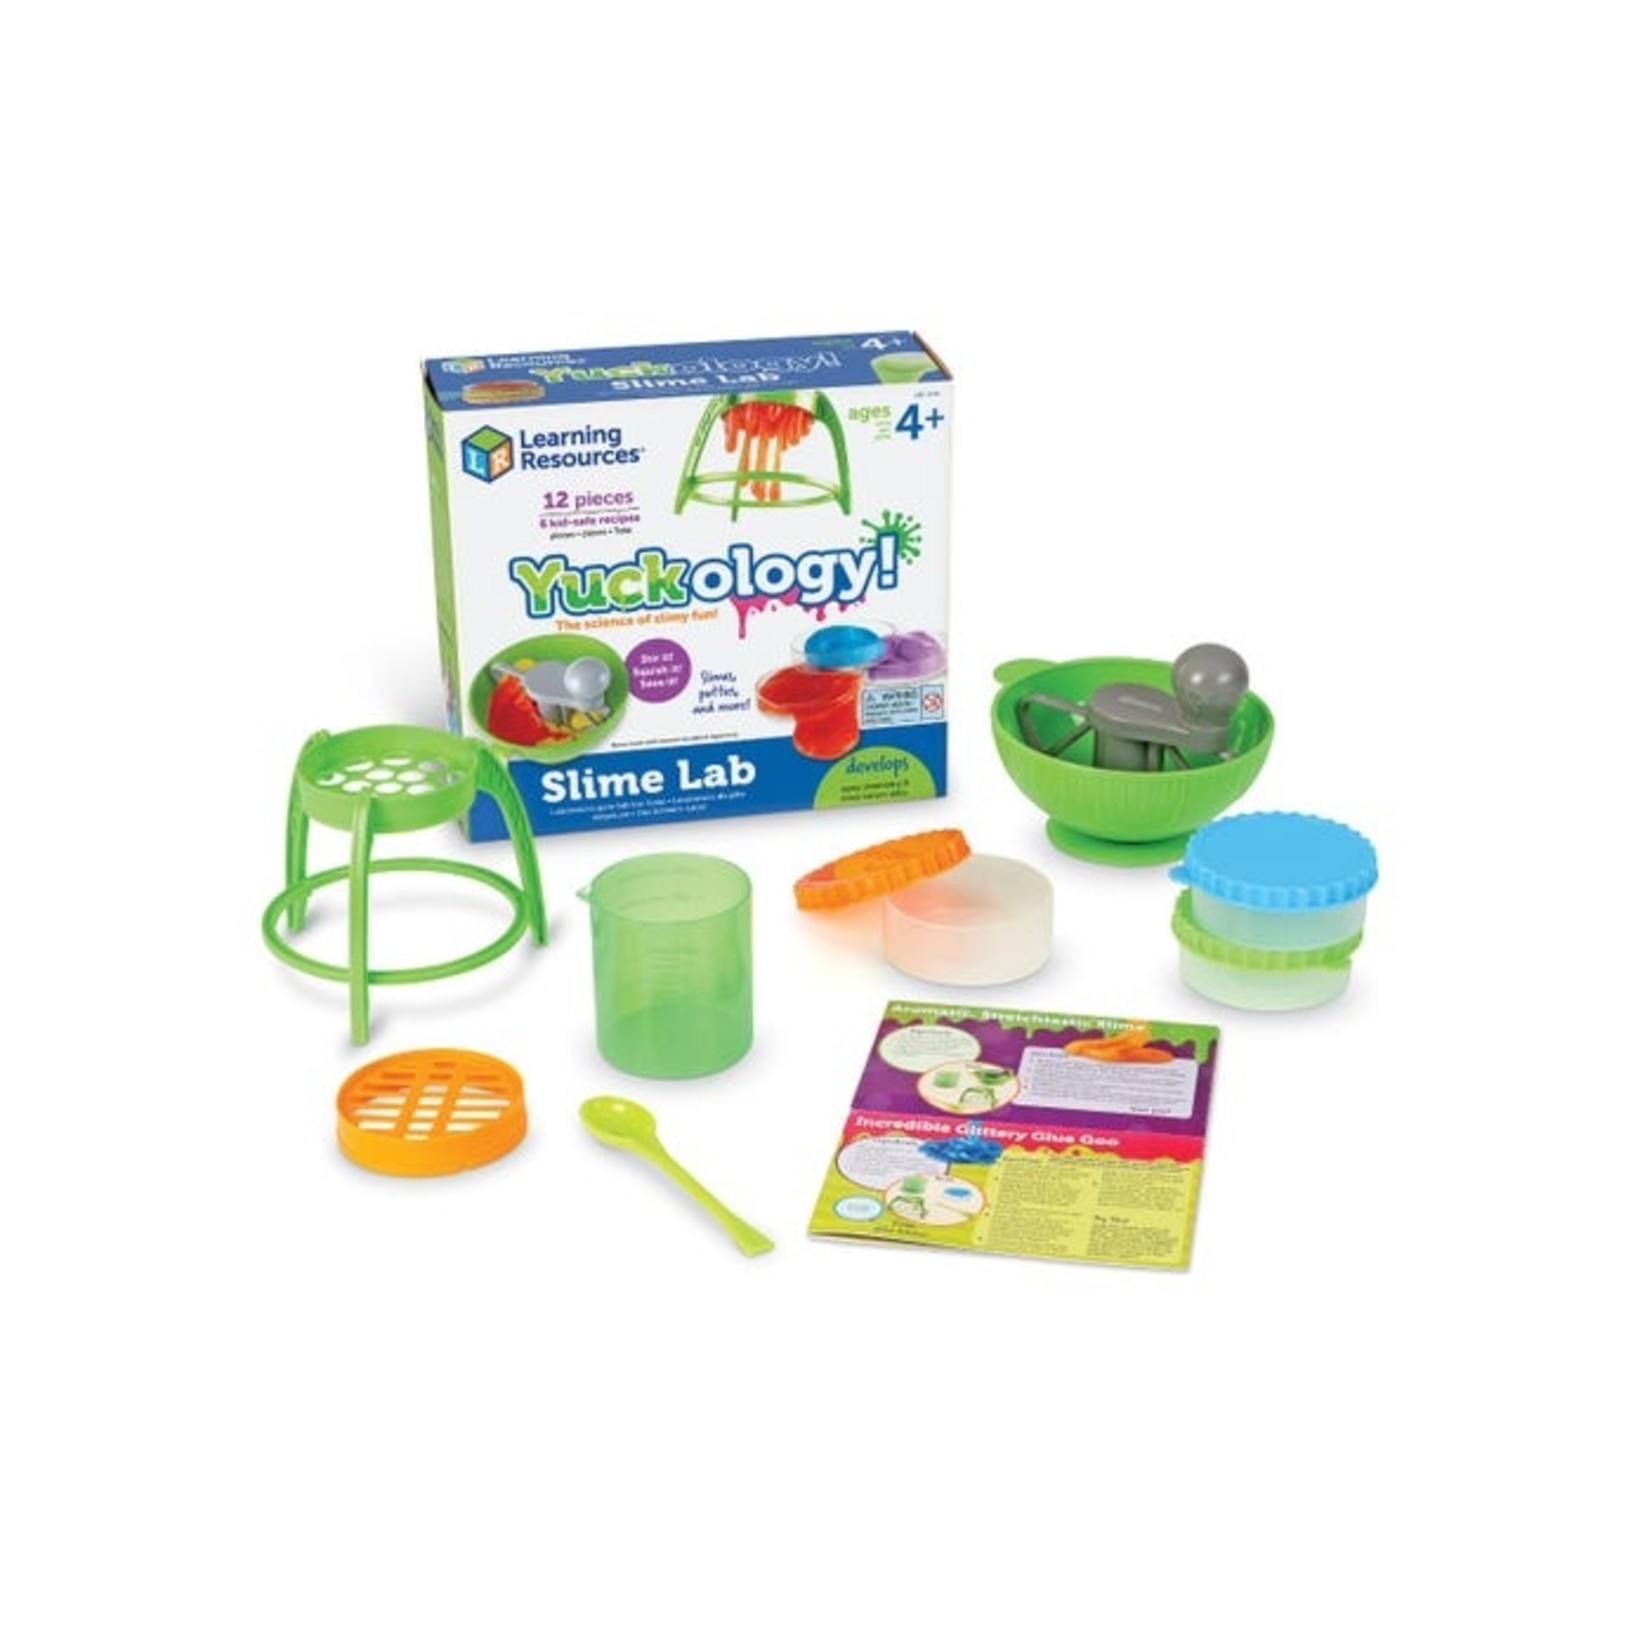 LEARNING RESOURCES INC Yuckology!™ Slime Lab